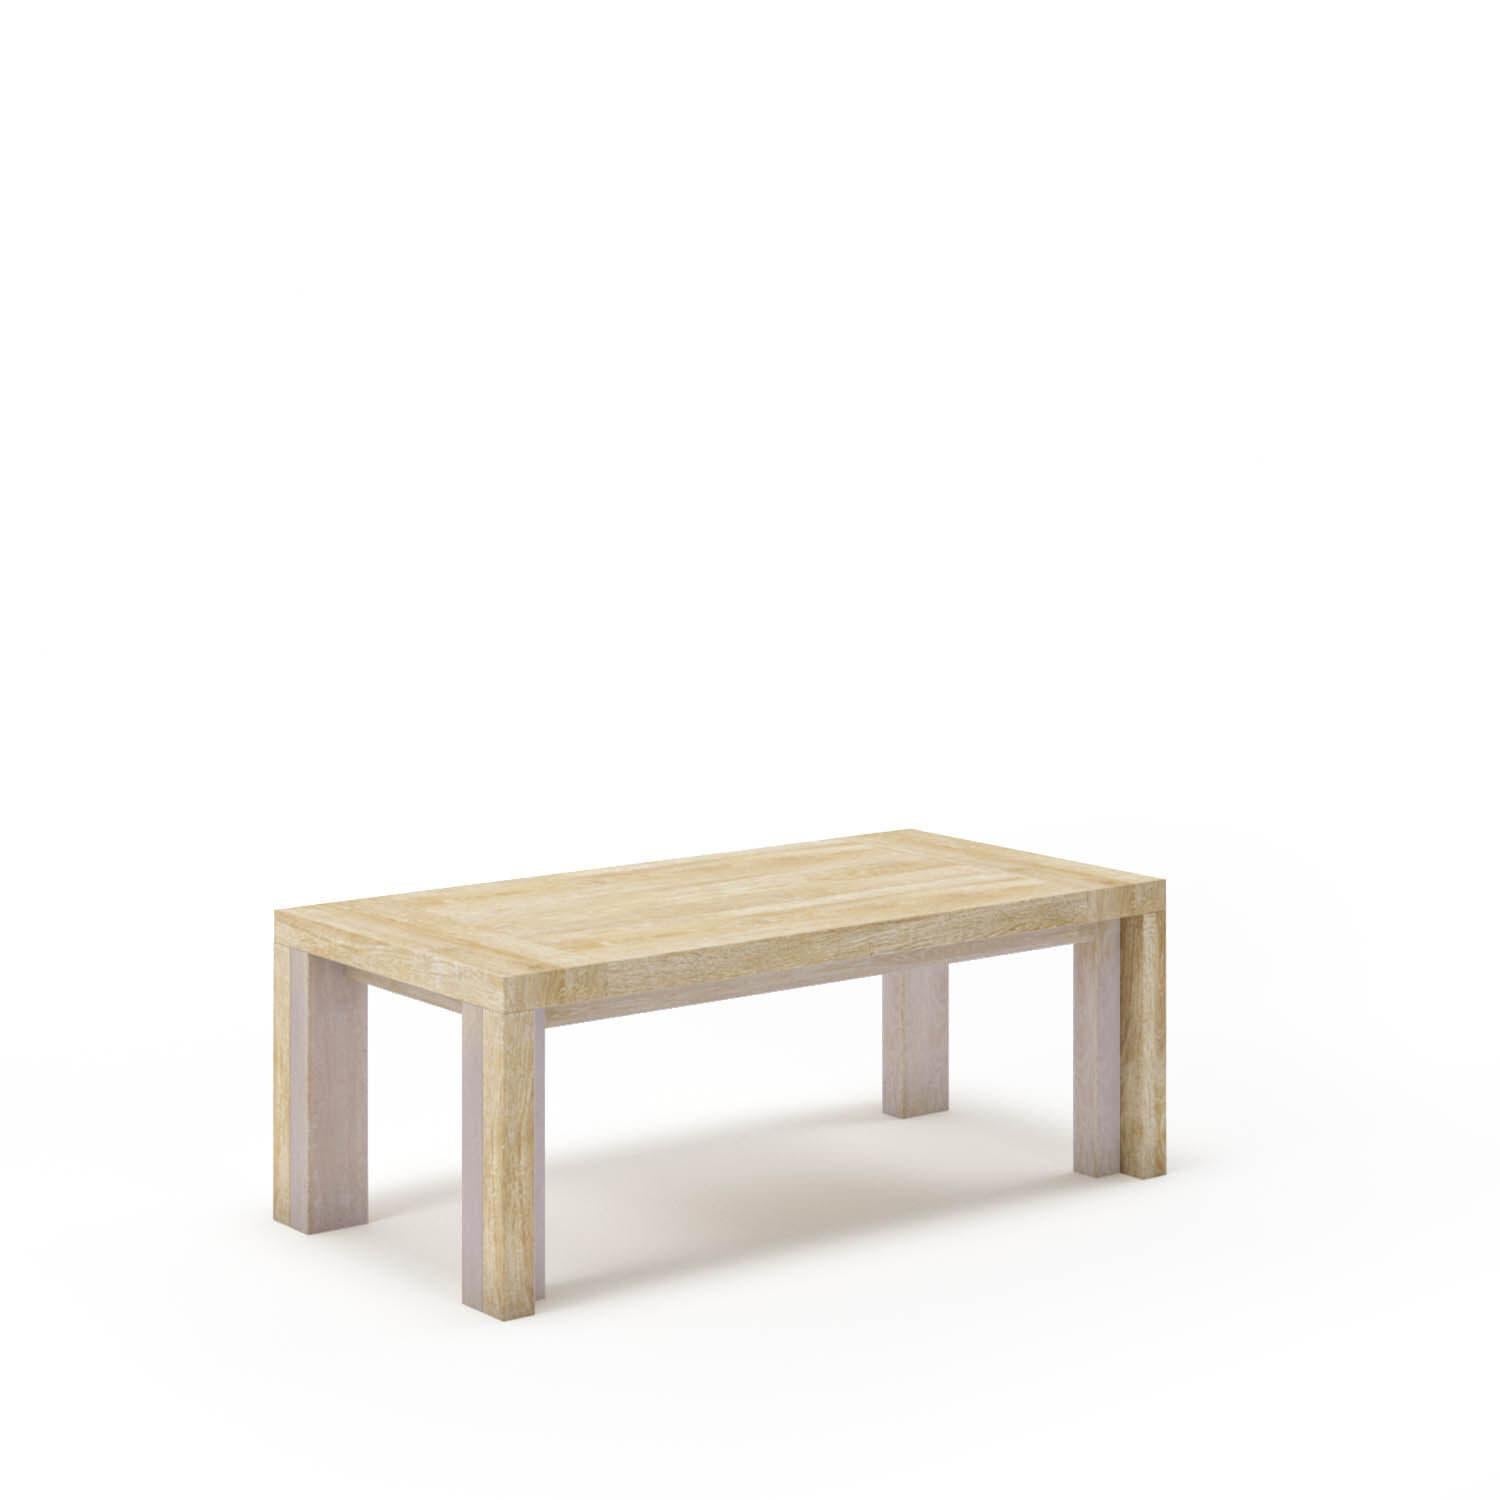 This beautiful Odda Coffee Table is crafted from massive oak, creating an eye-catching center piece for any living room. Boasting a sturdy and durable design, this piece is sure to last. 

All Tektōn pieces are made of natural massive wood.
Small